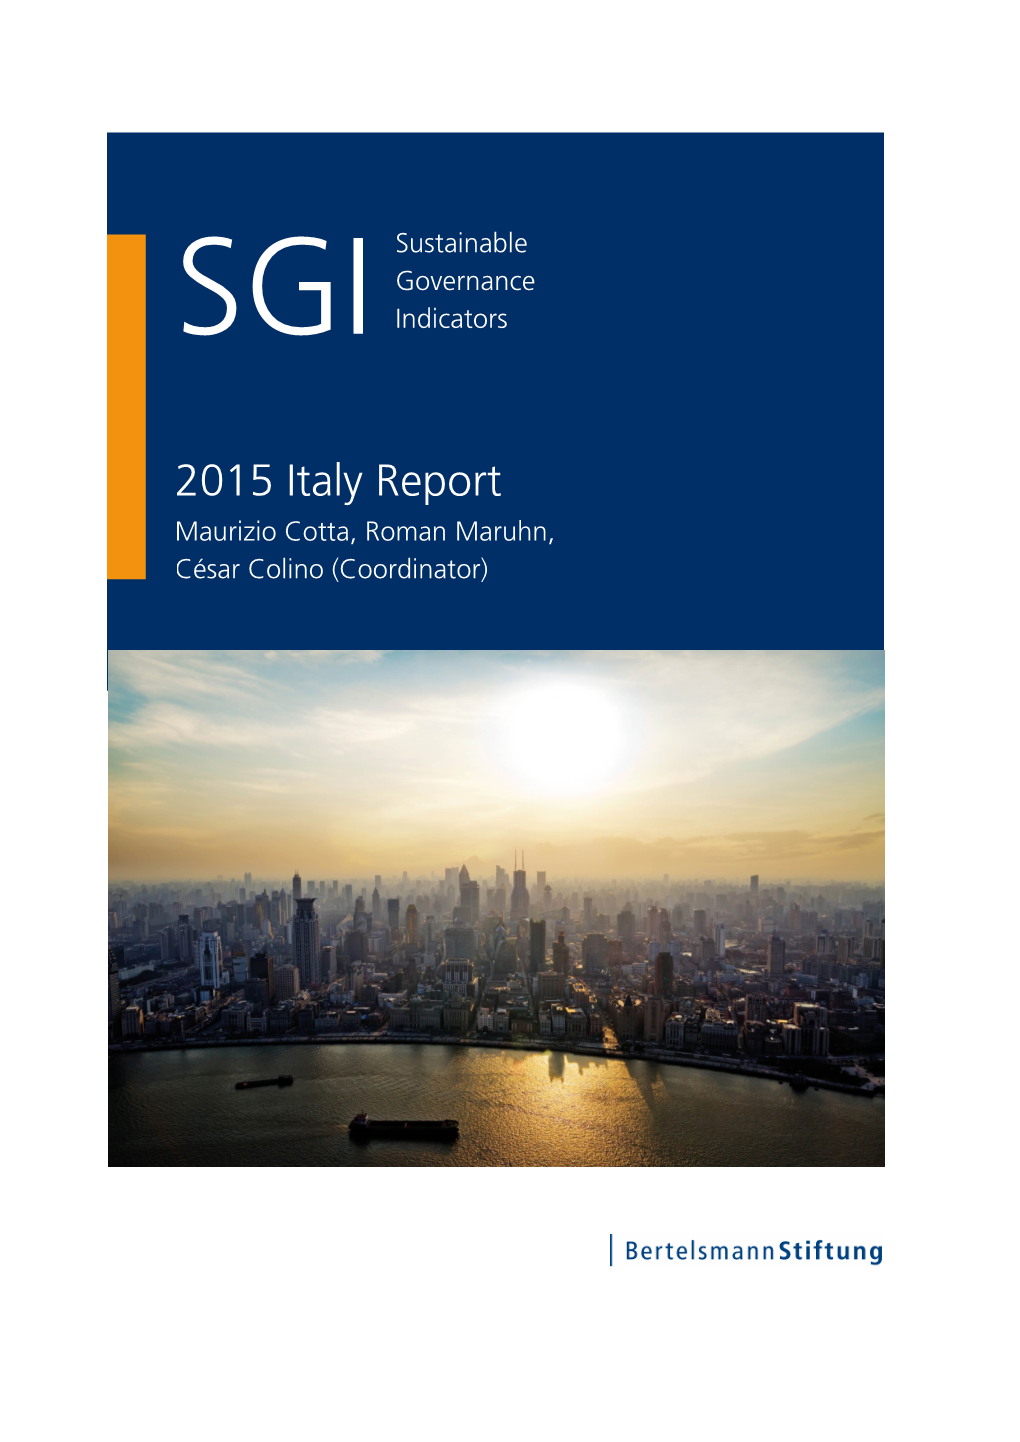 2015 Italy Country Report | SGI Sustainable Governance Indicators